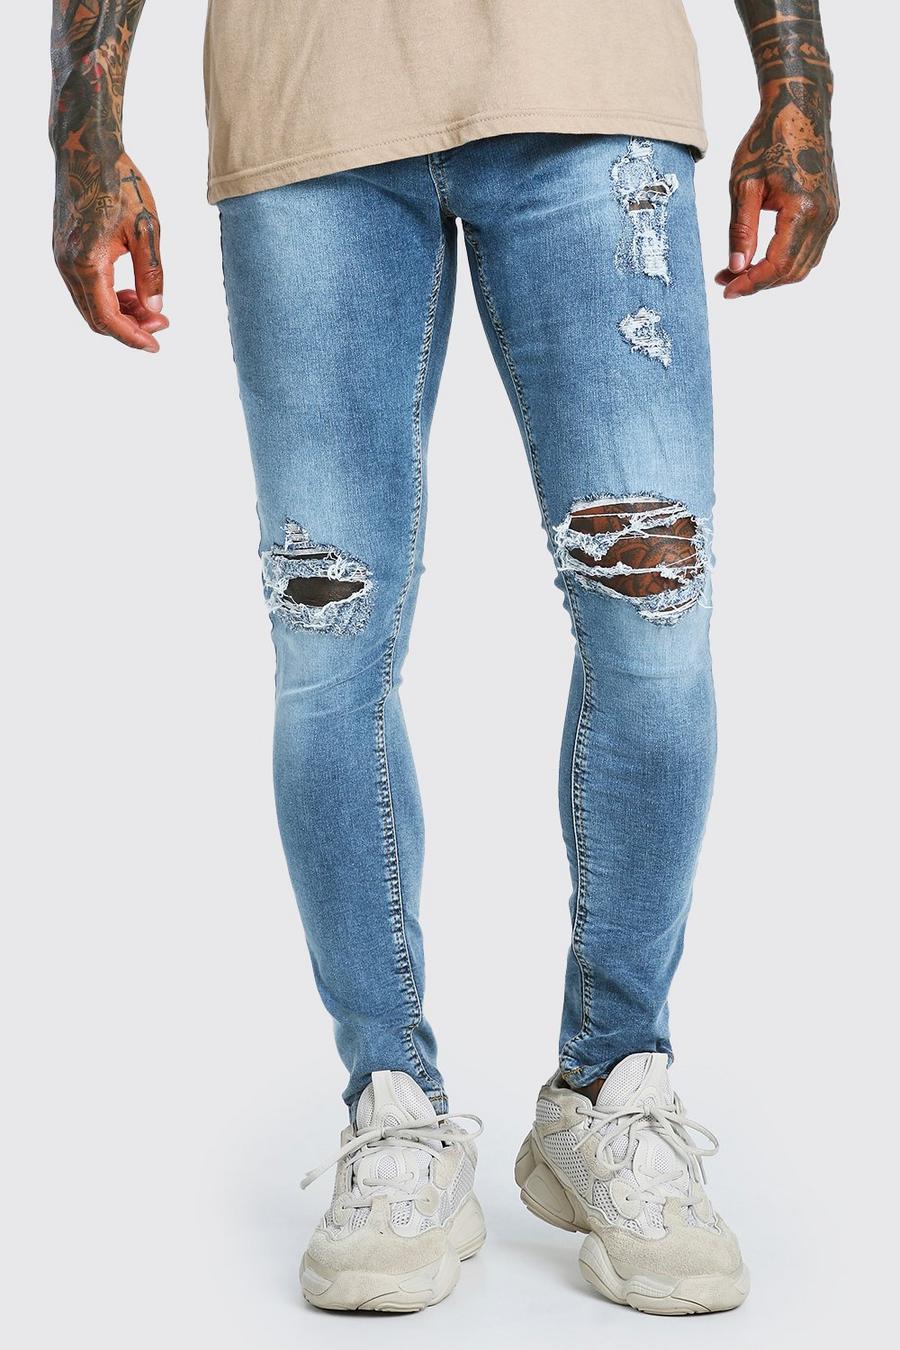 Men's Super Skinny Jeans With Busted Knees | boohoo